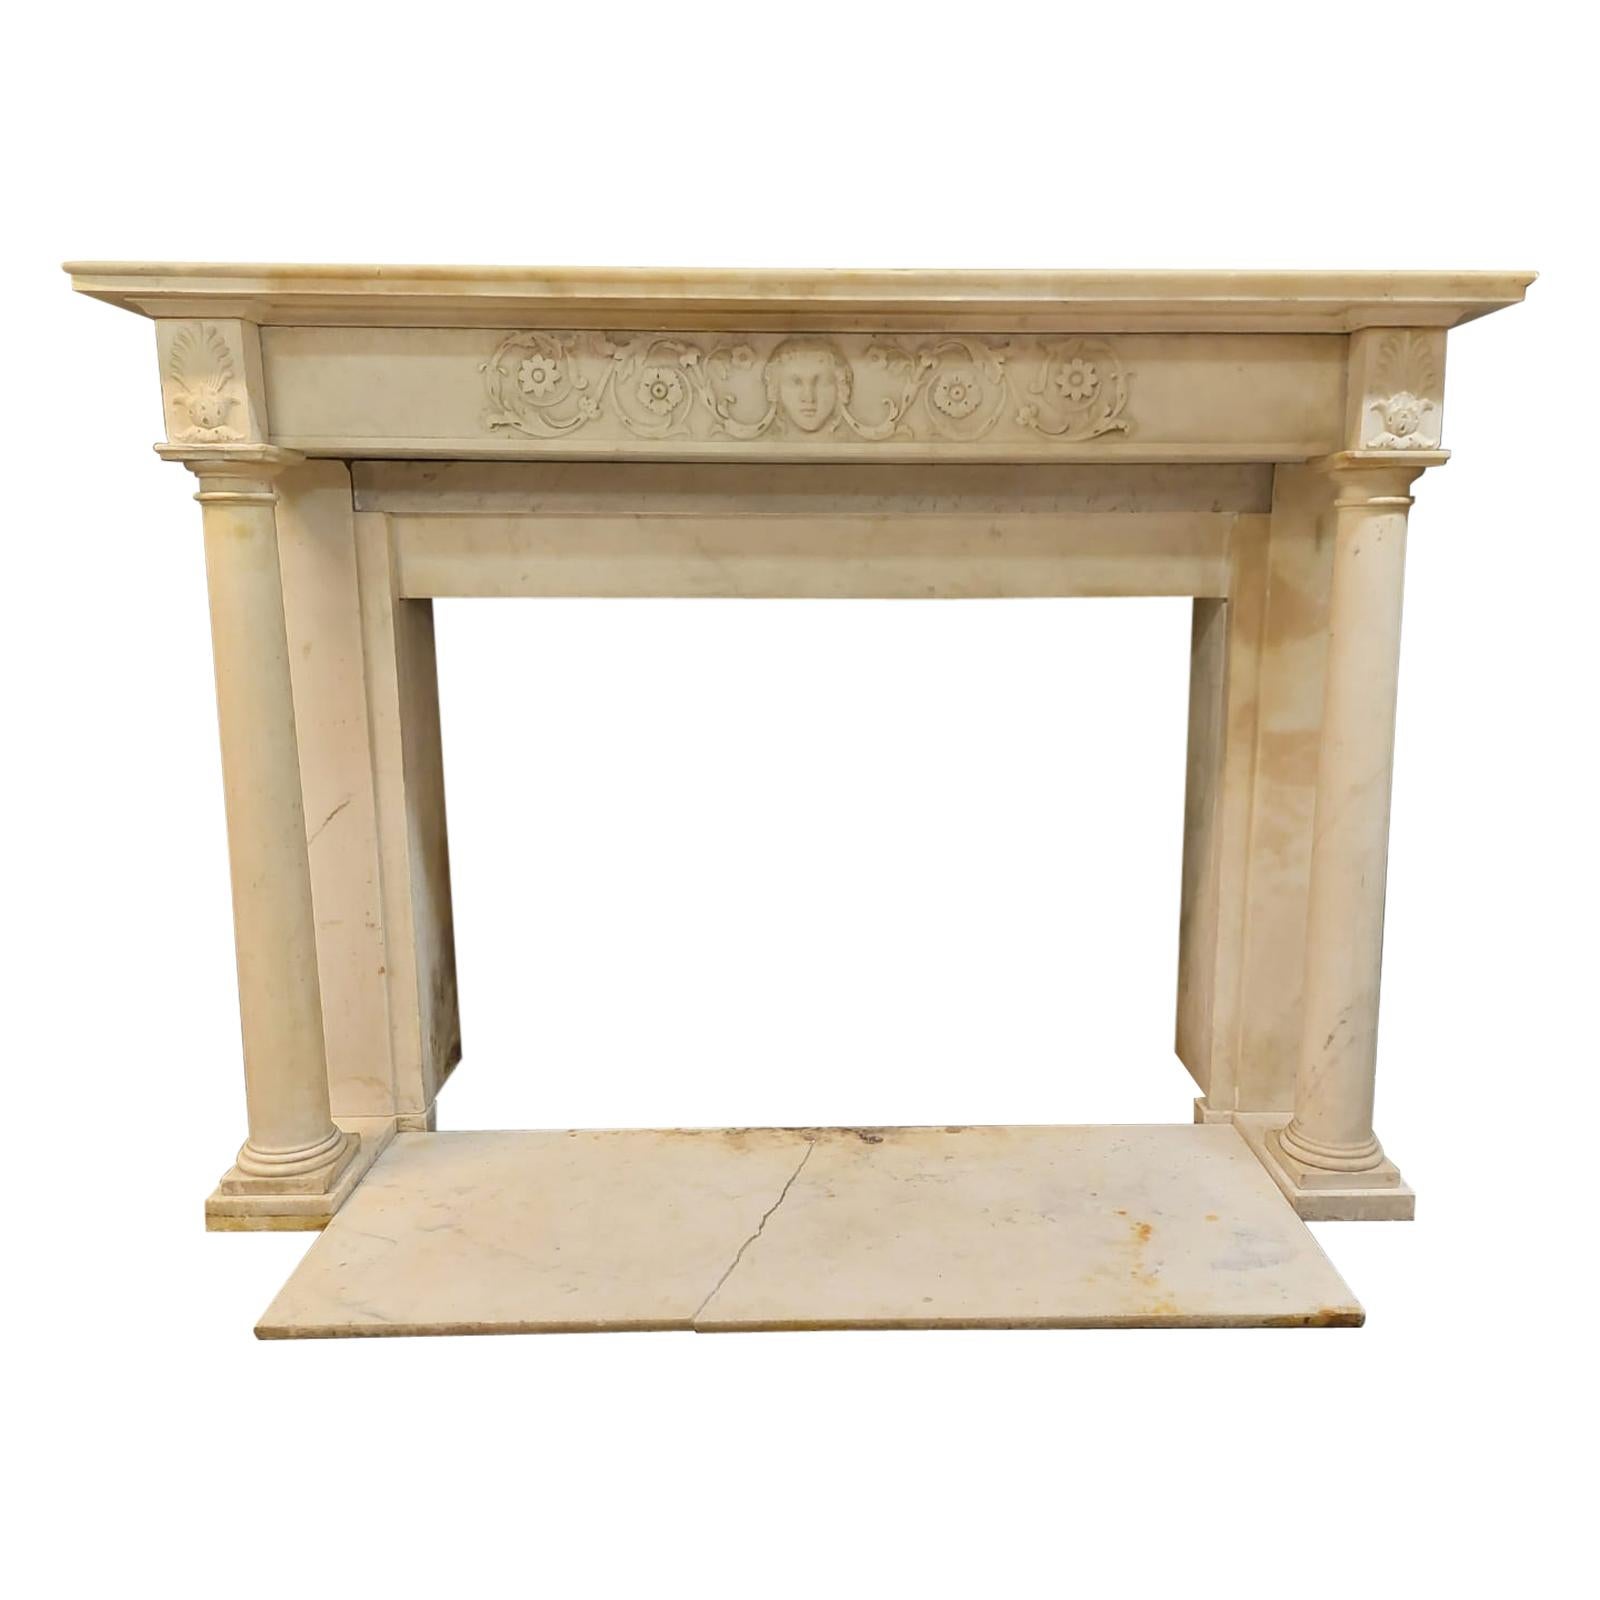 Antique White Carrara Marble Fireplace, Carved Columns and Threshold, 1830 Italy